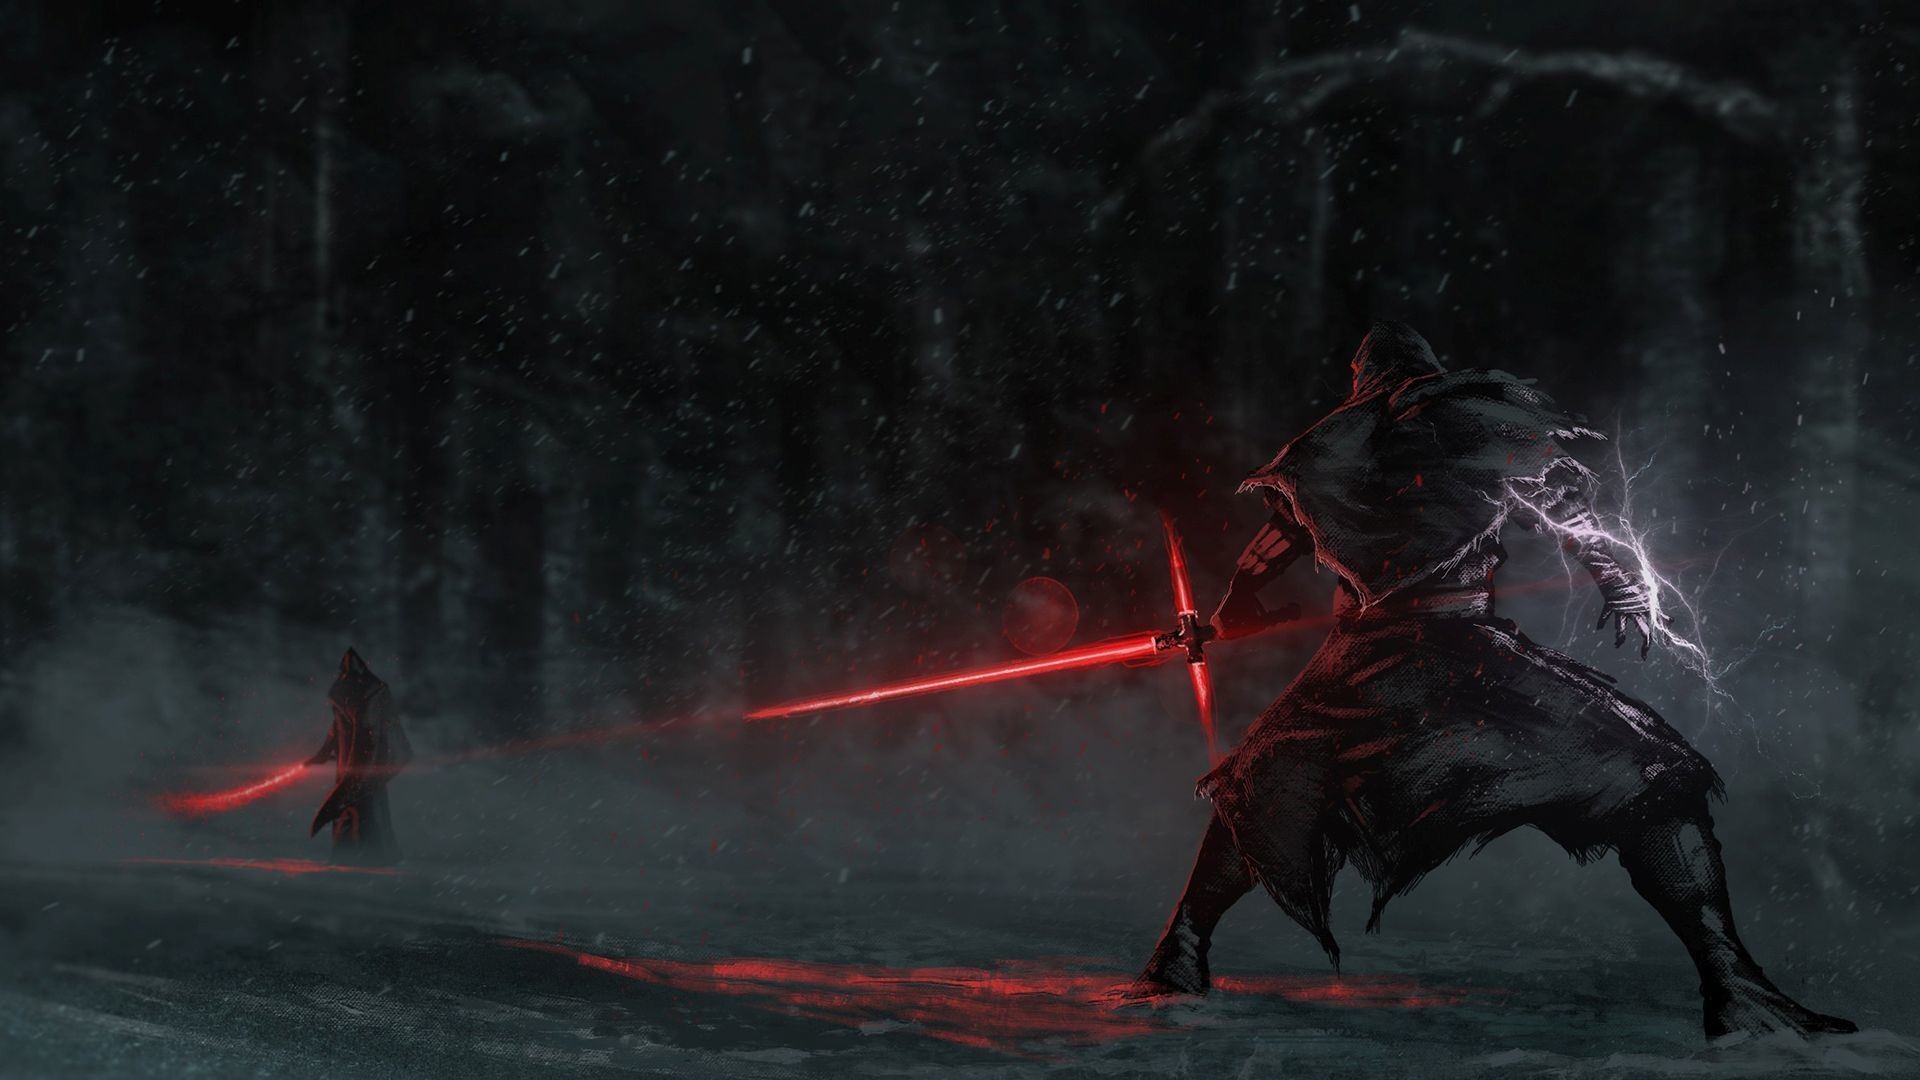 1920x1080 Fighting with lightsabers HD Wallpaper 